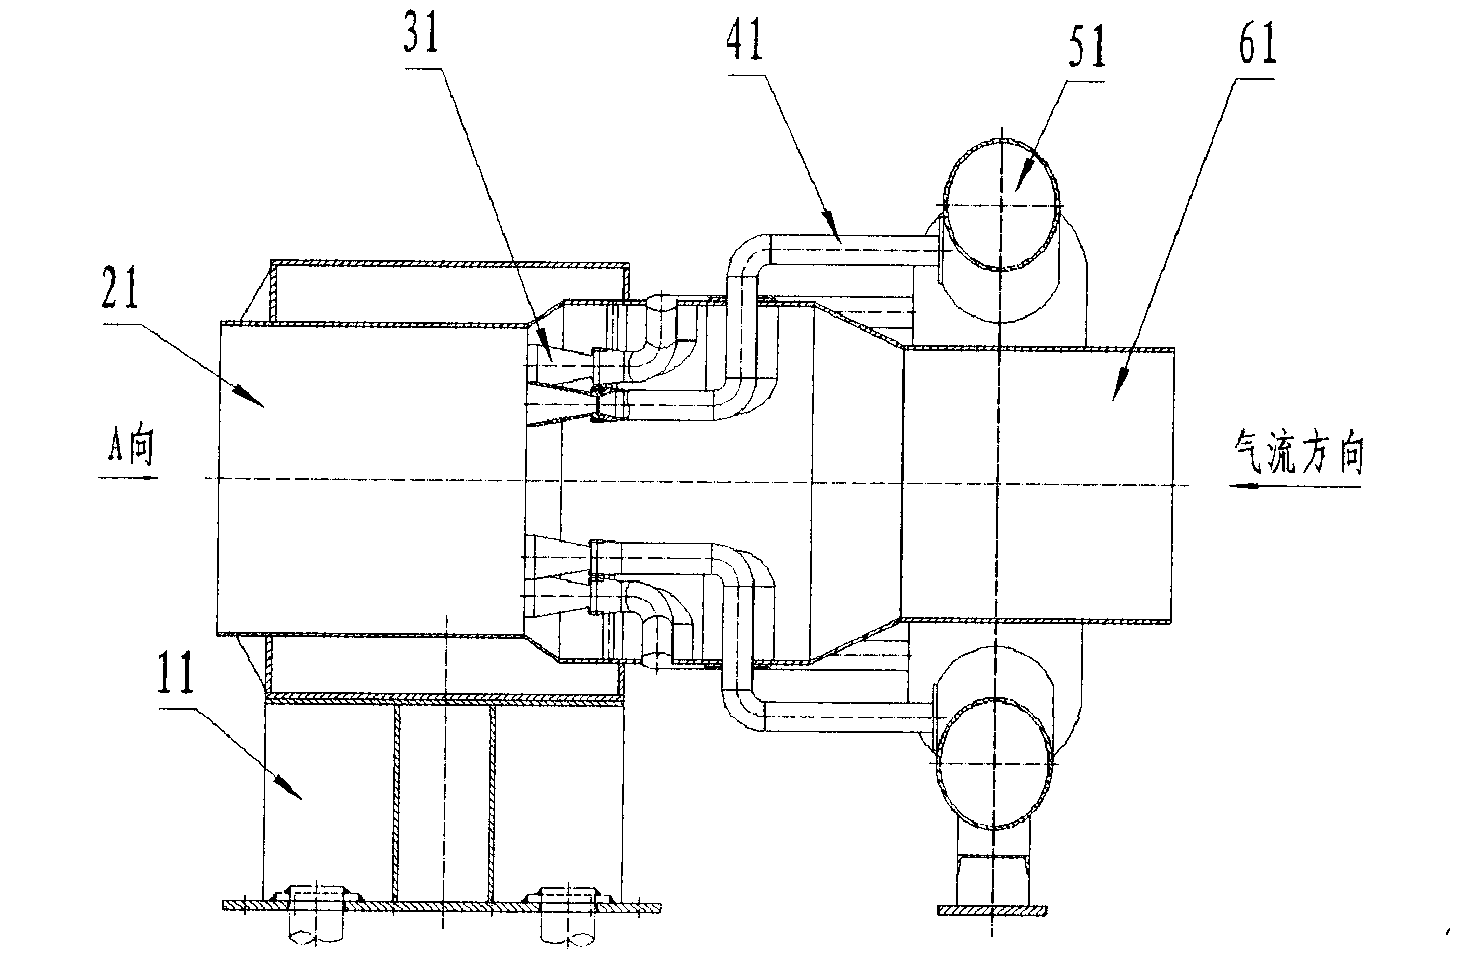 Three-level multi-spray-pipe central ejector